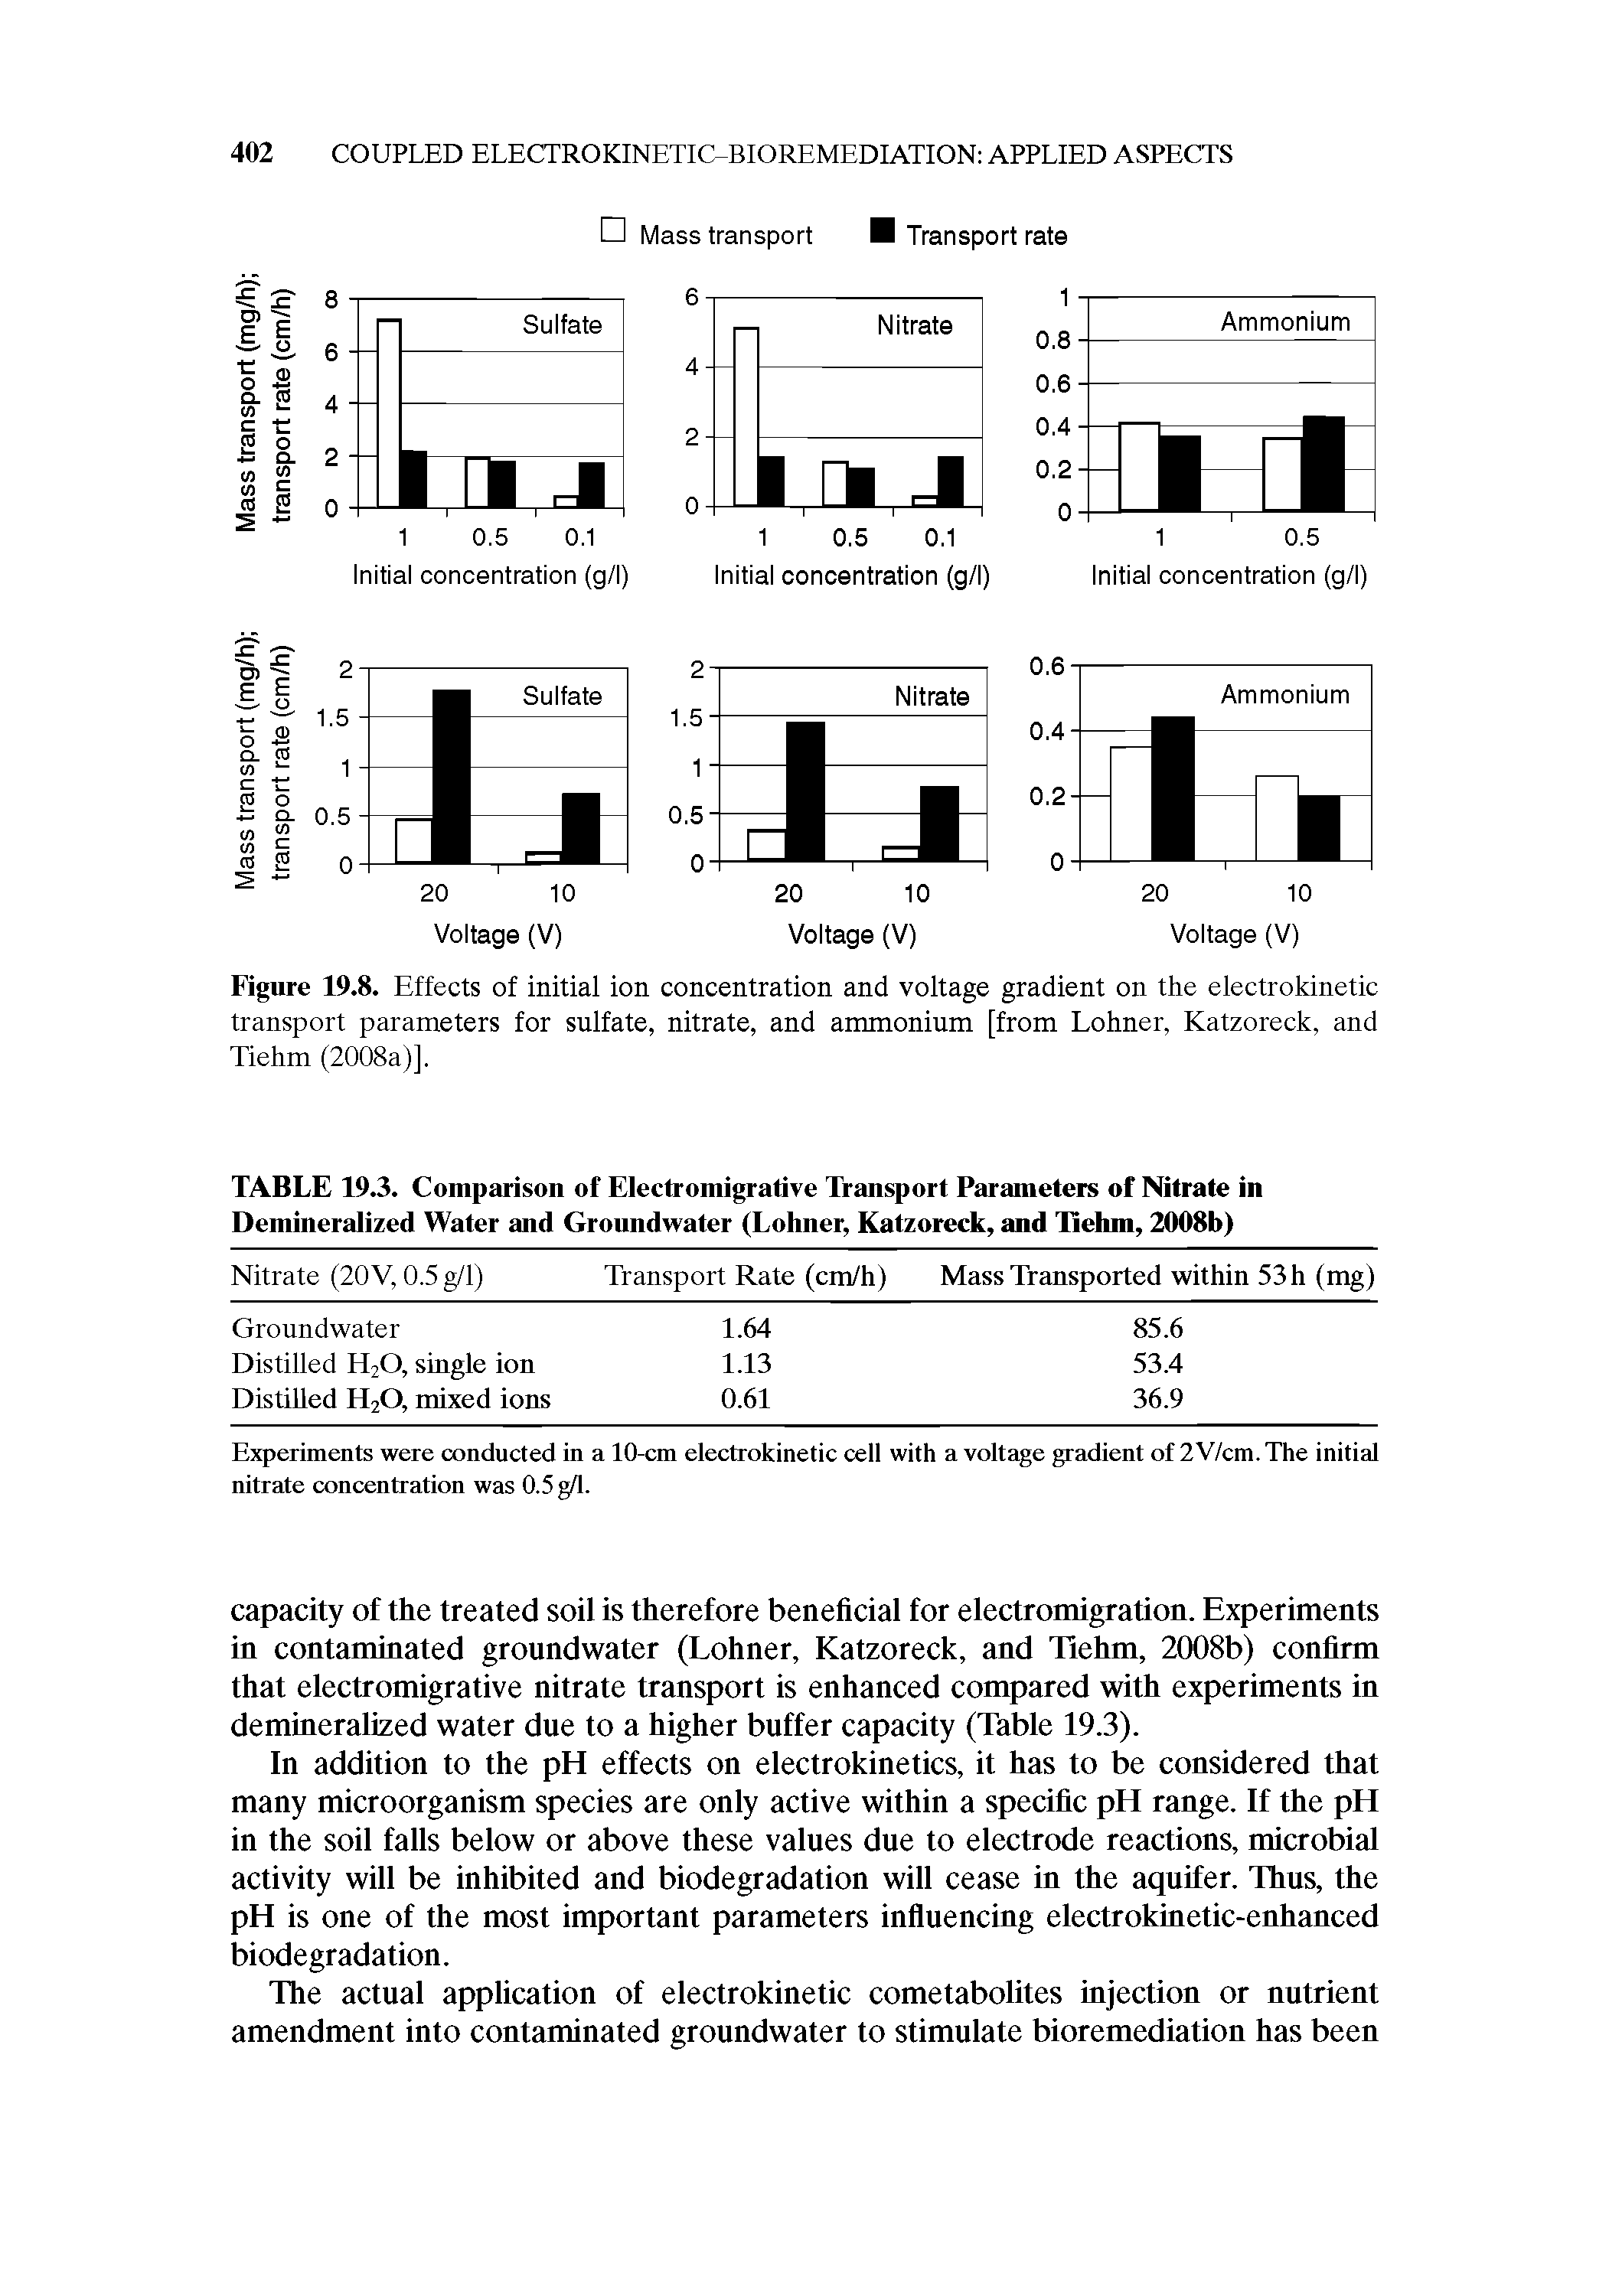 Figure 19.8. Effects of initial ion concentration and voltage gradient on the electrokinetic transport parameters for sulfate, nitrate, and ammonium [from Lohner, Katzoreck, and Tiehm (2008a)].